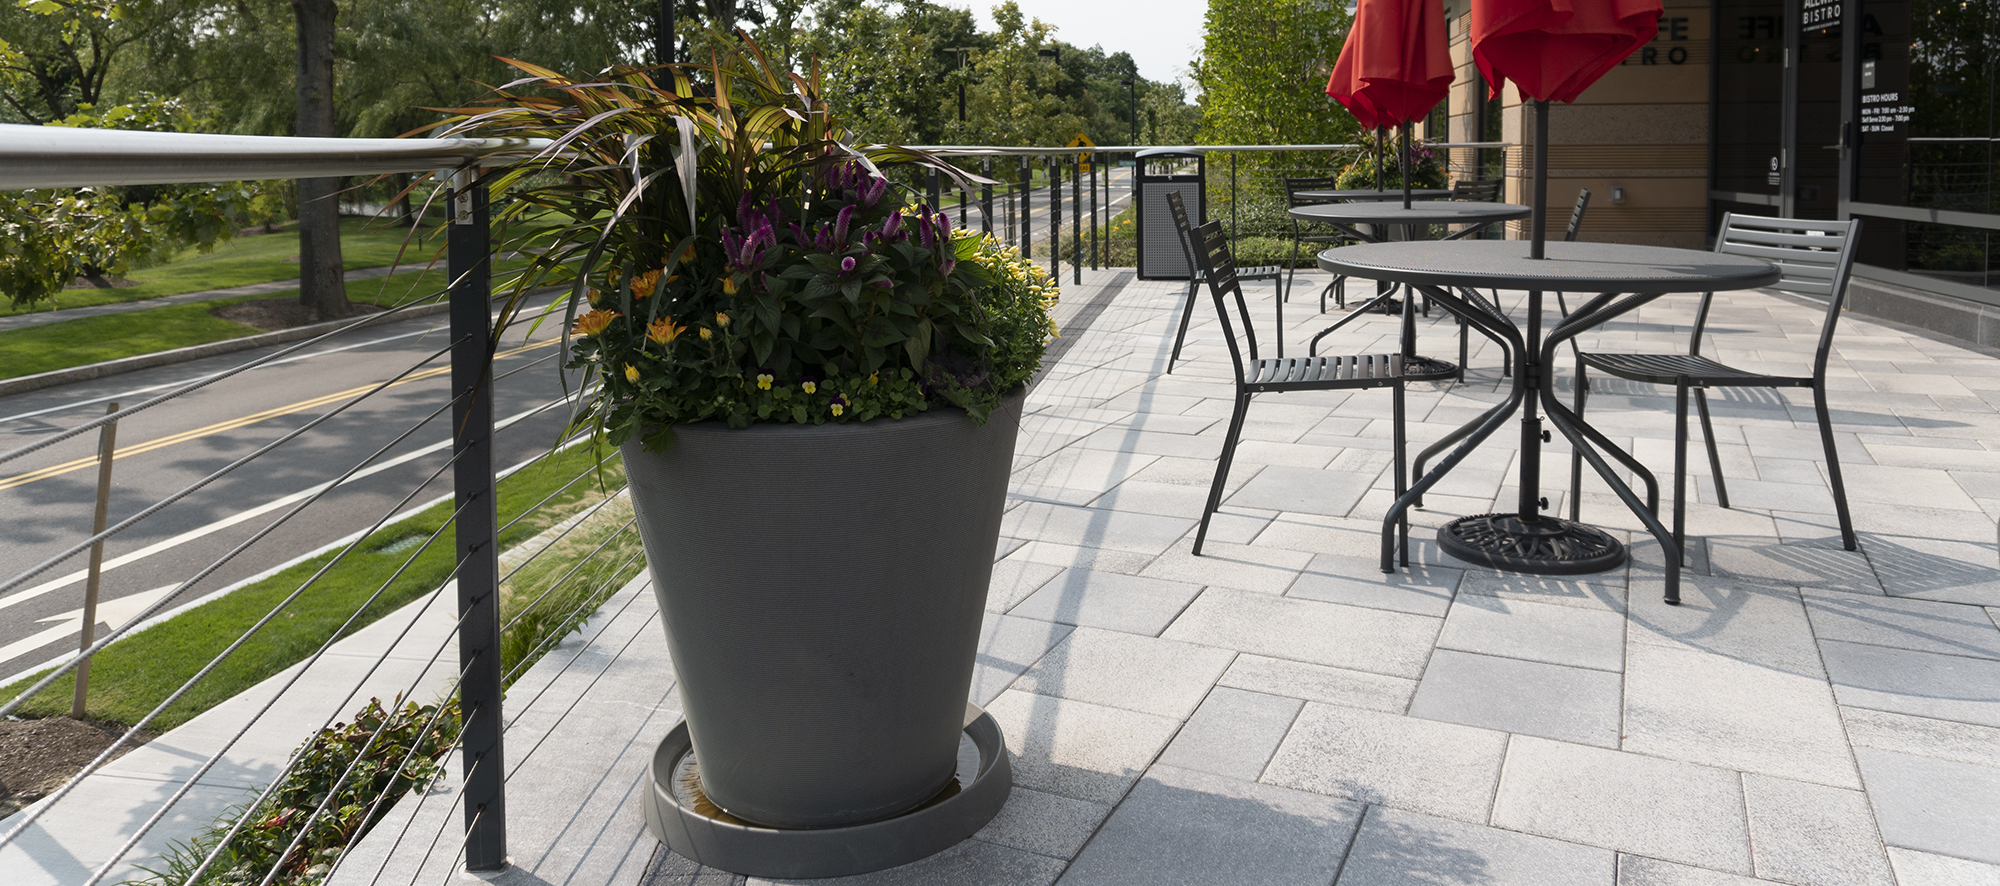 White Umbriano paver patio is enclosed by a wire railing, with a decorative seasonal plant, an outdoor table and chairs adorning the space.